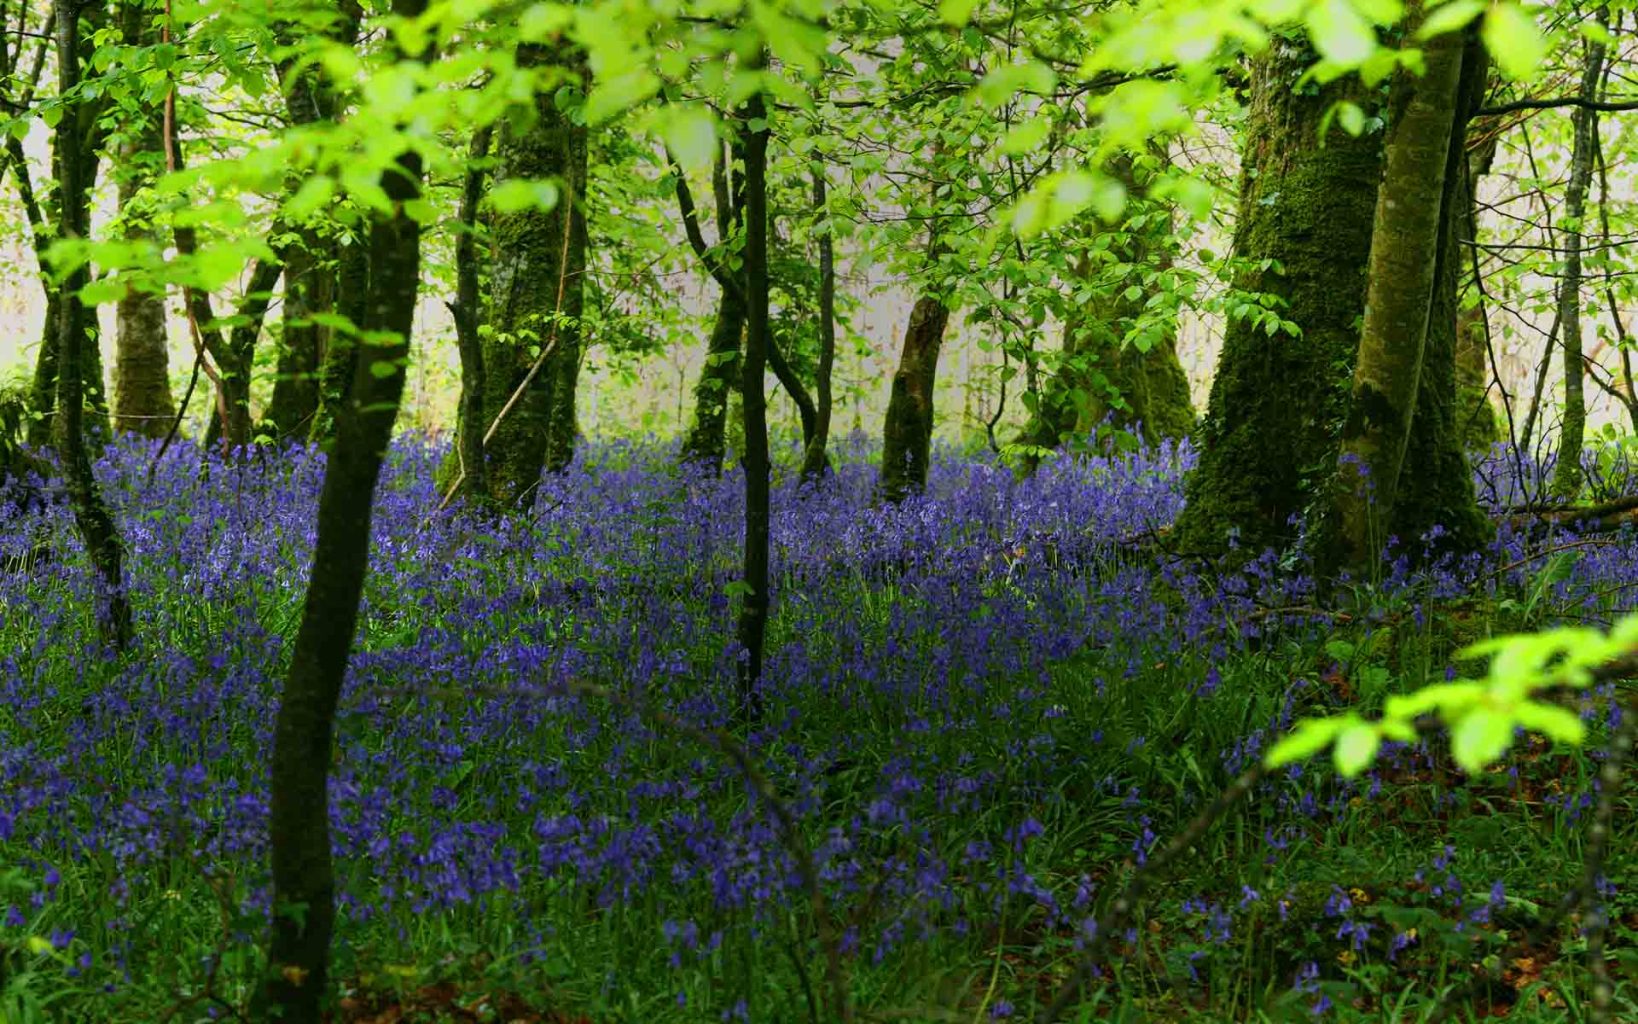 Bluebells at Lough Key forest.